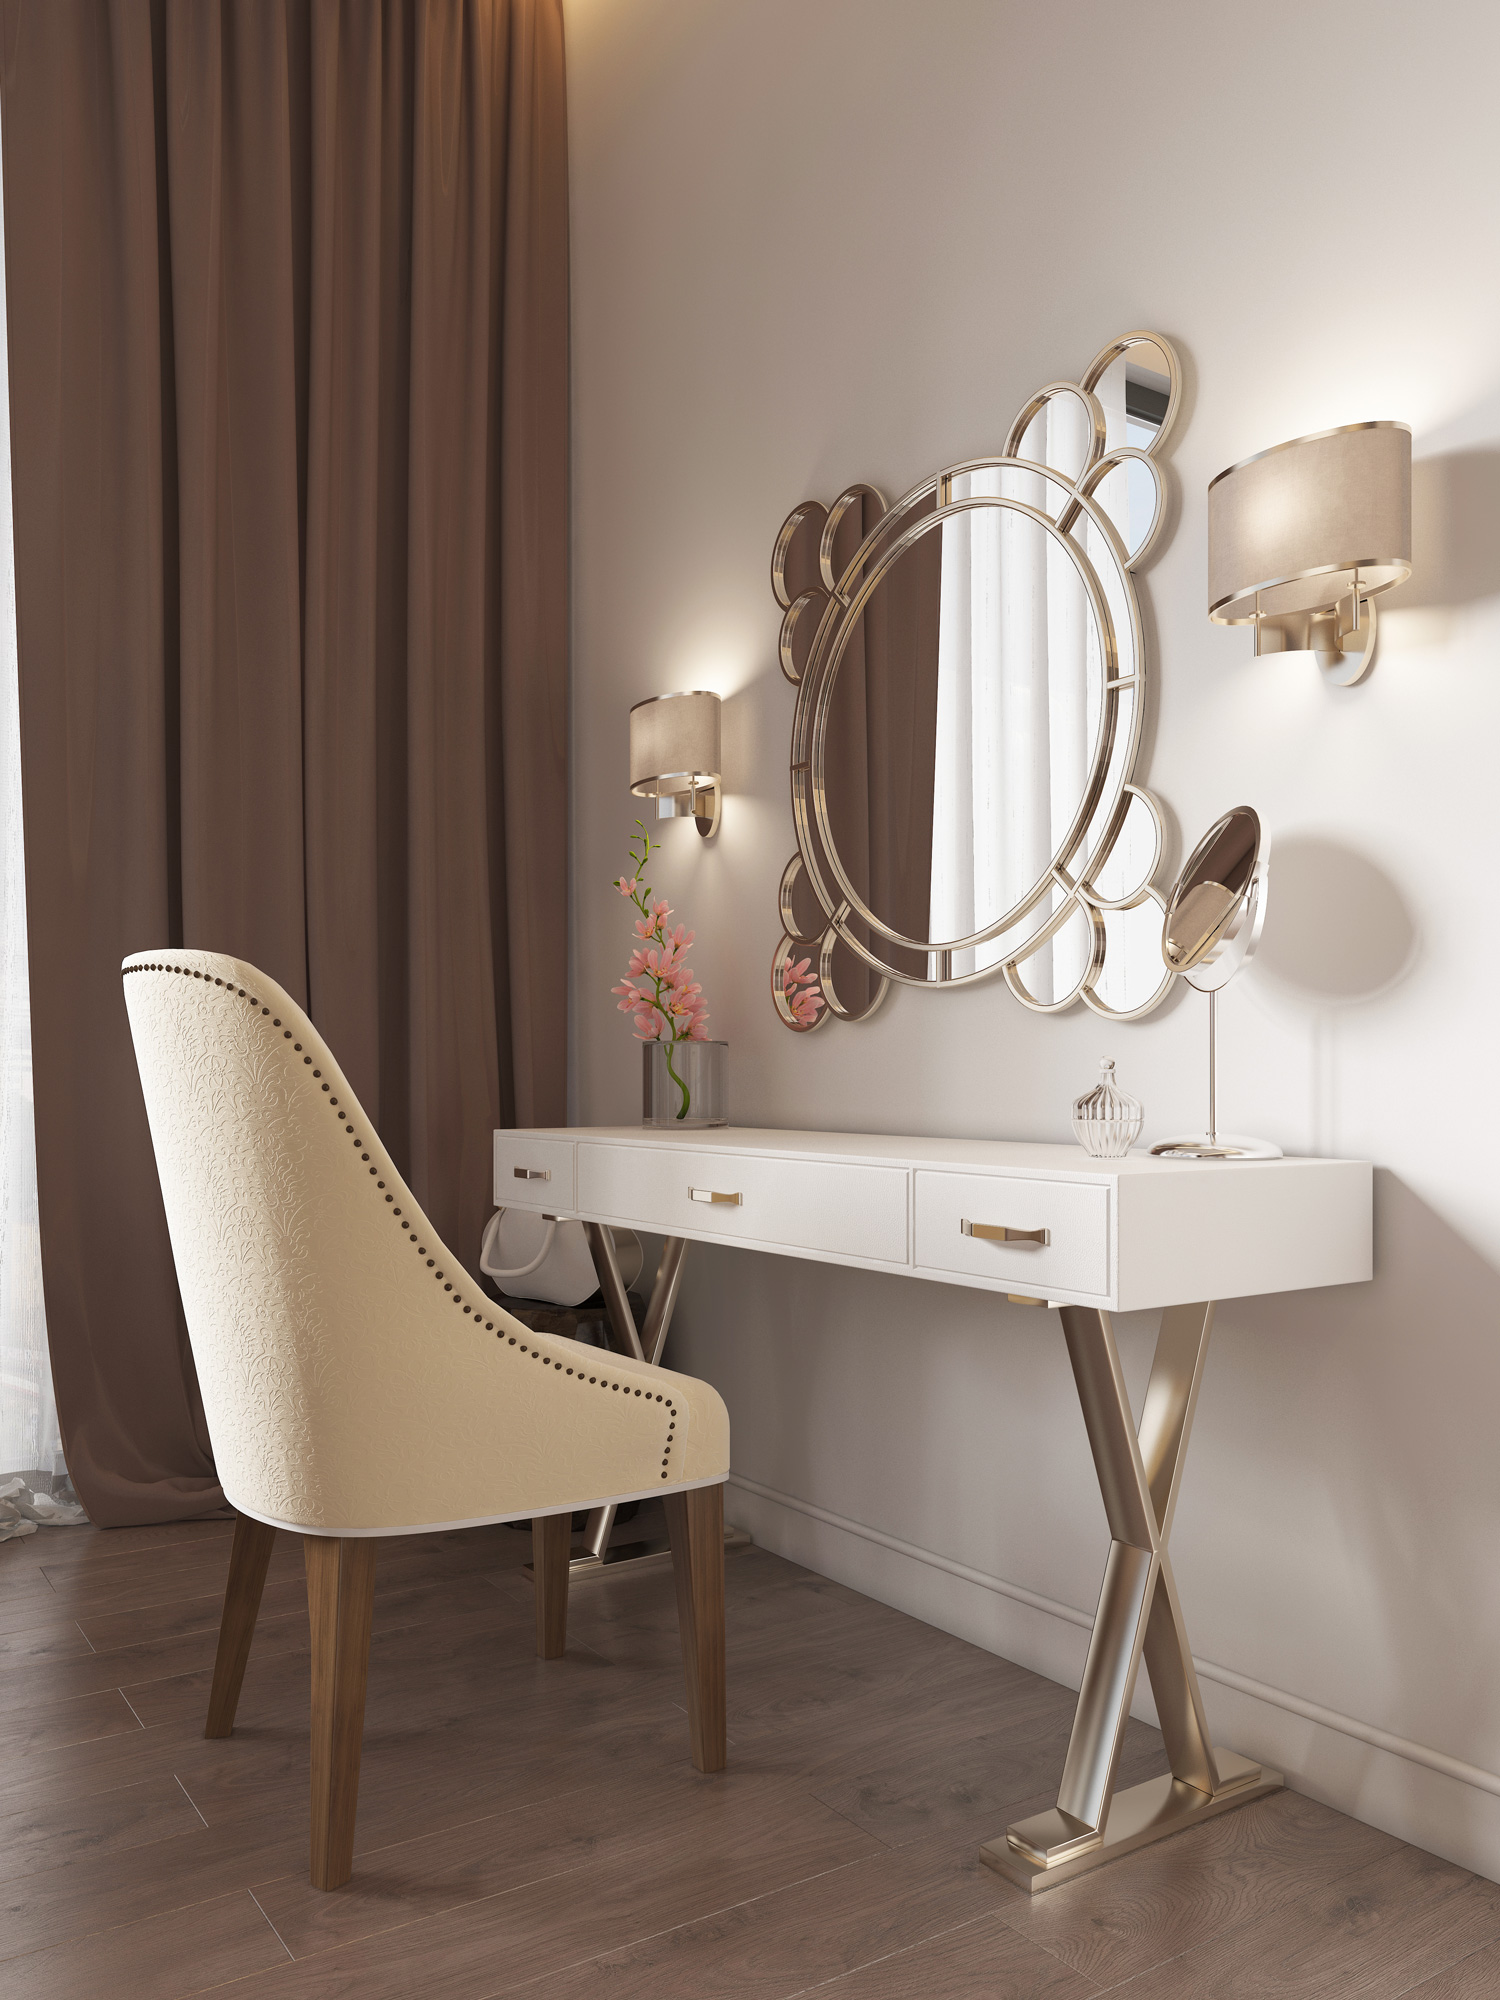 White dressing table with decor, mirror and sconces on the wall. White soft chair.